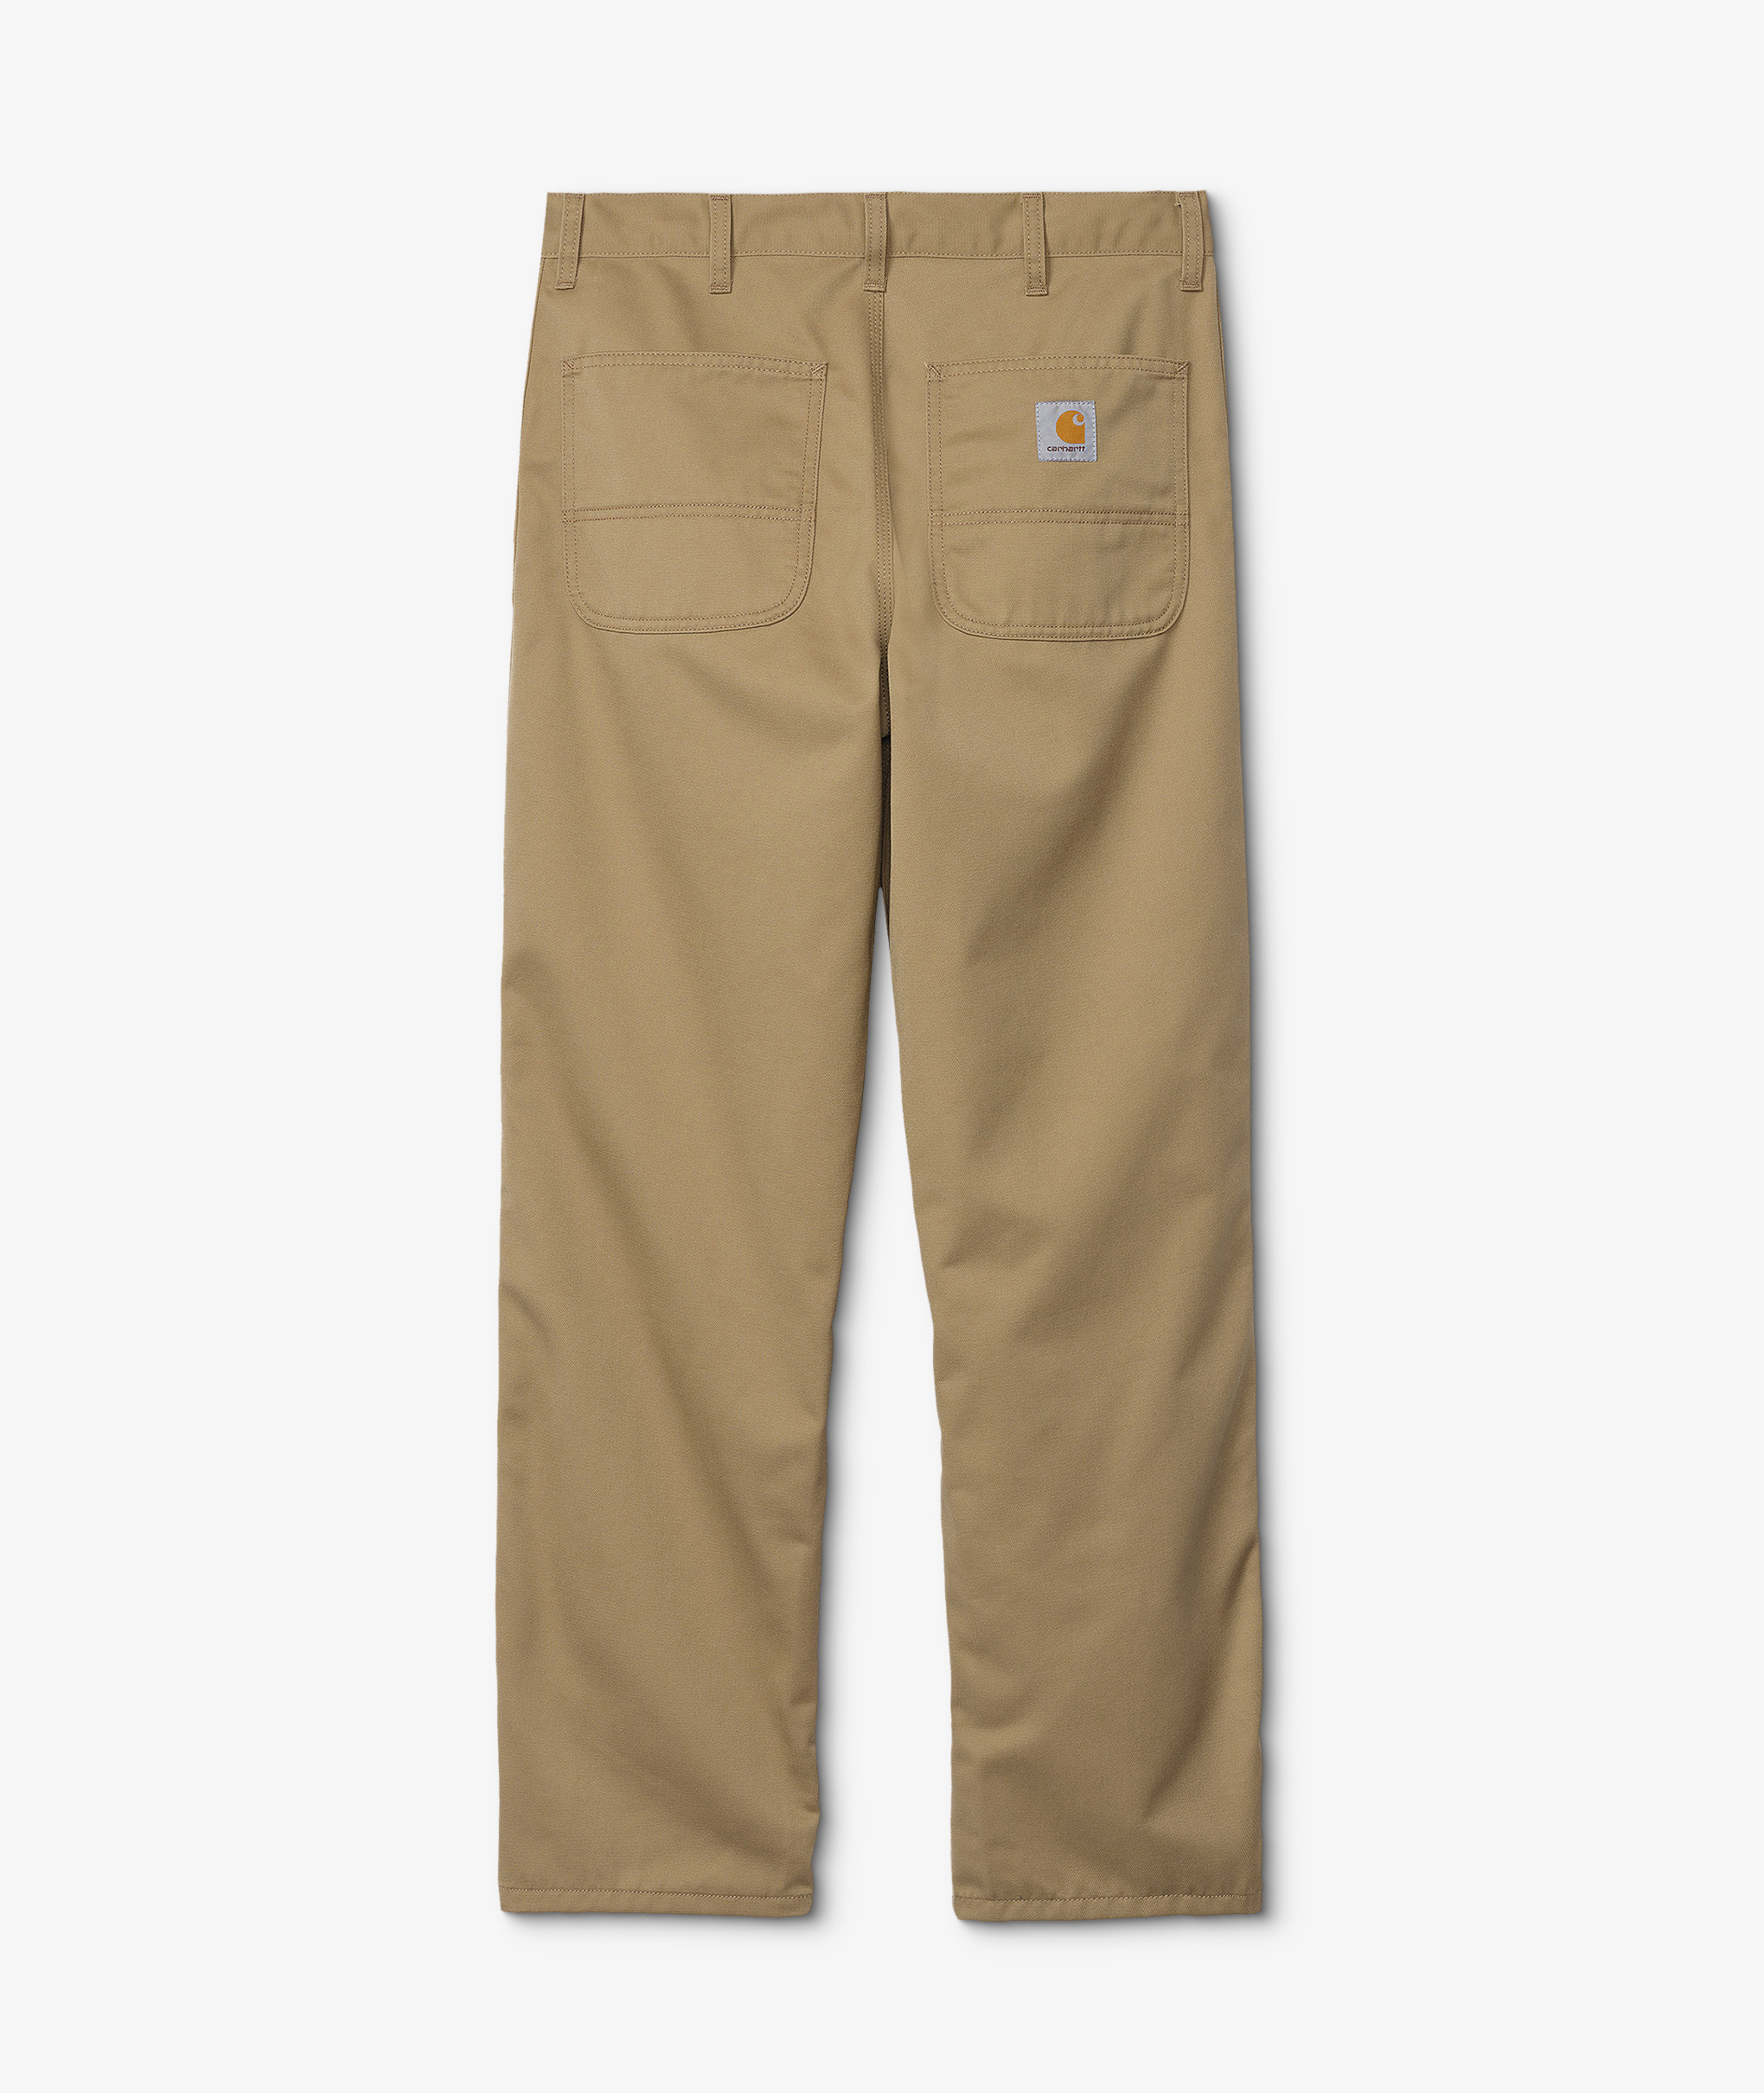 Norse Store  Shipping Worldwide - Carhartt WIP Simple Pant - Leather Rinsed